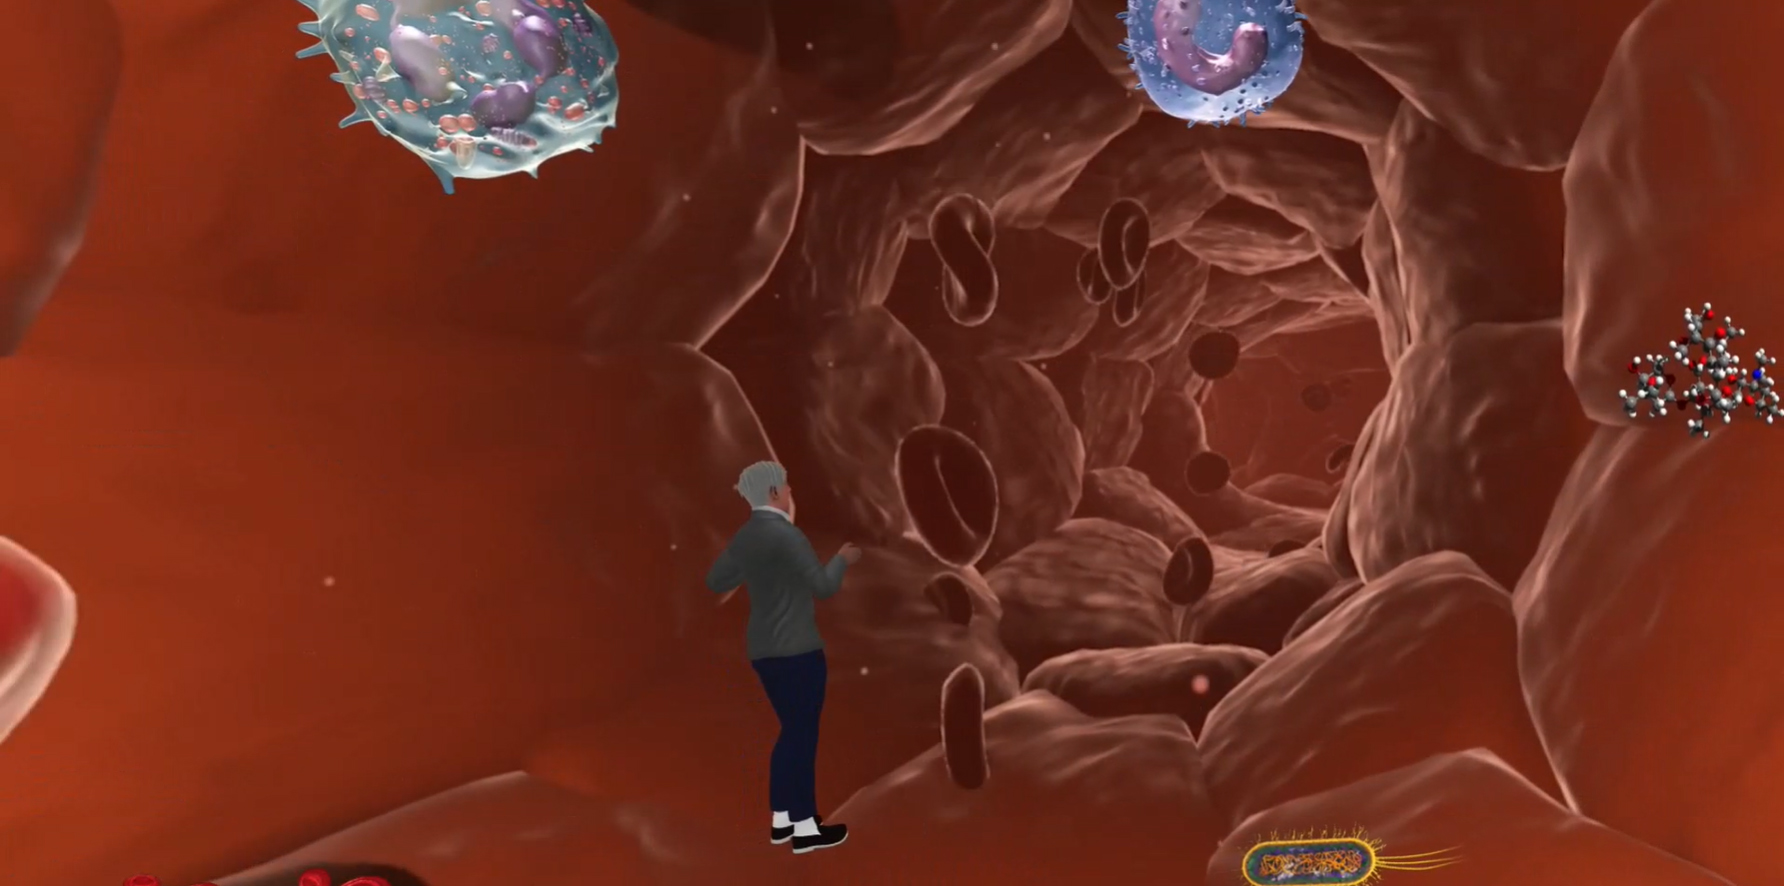 virtual reality image of person standing inside an artery looking at blood vessels